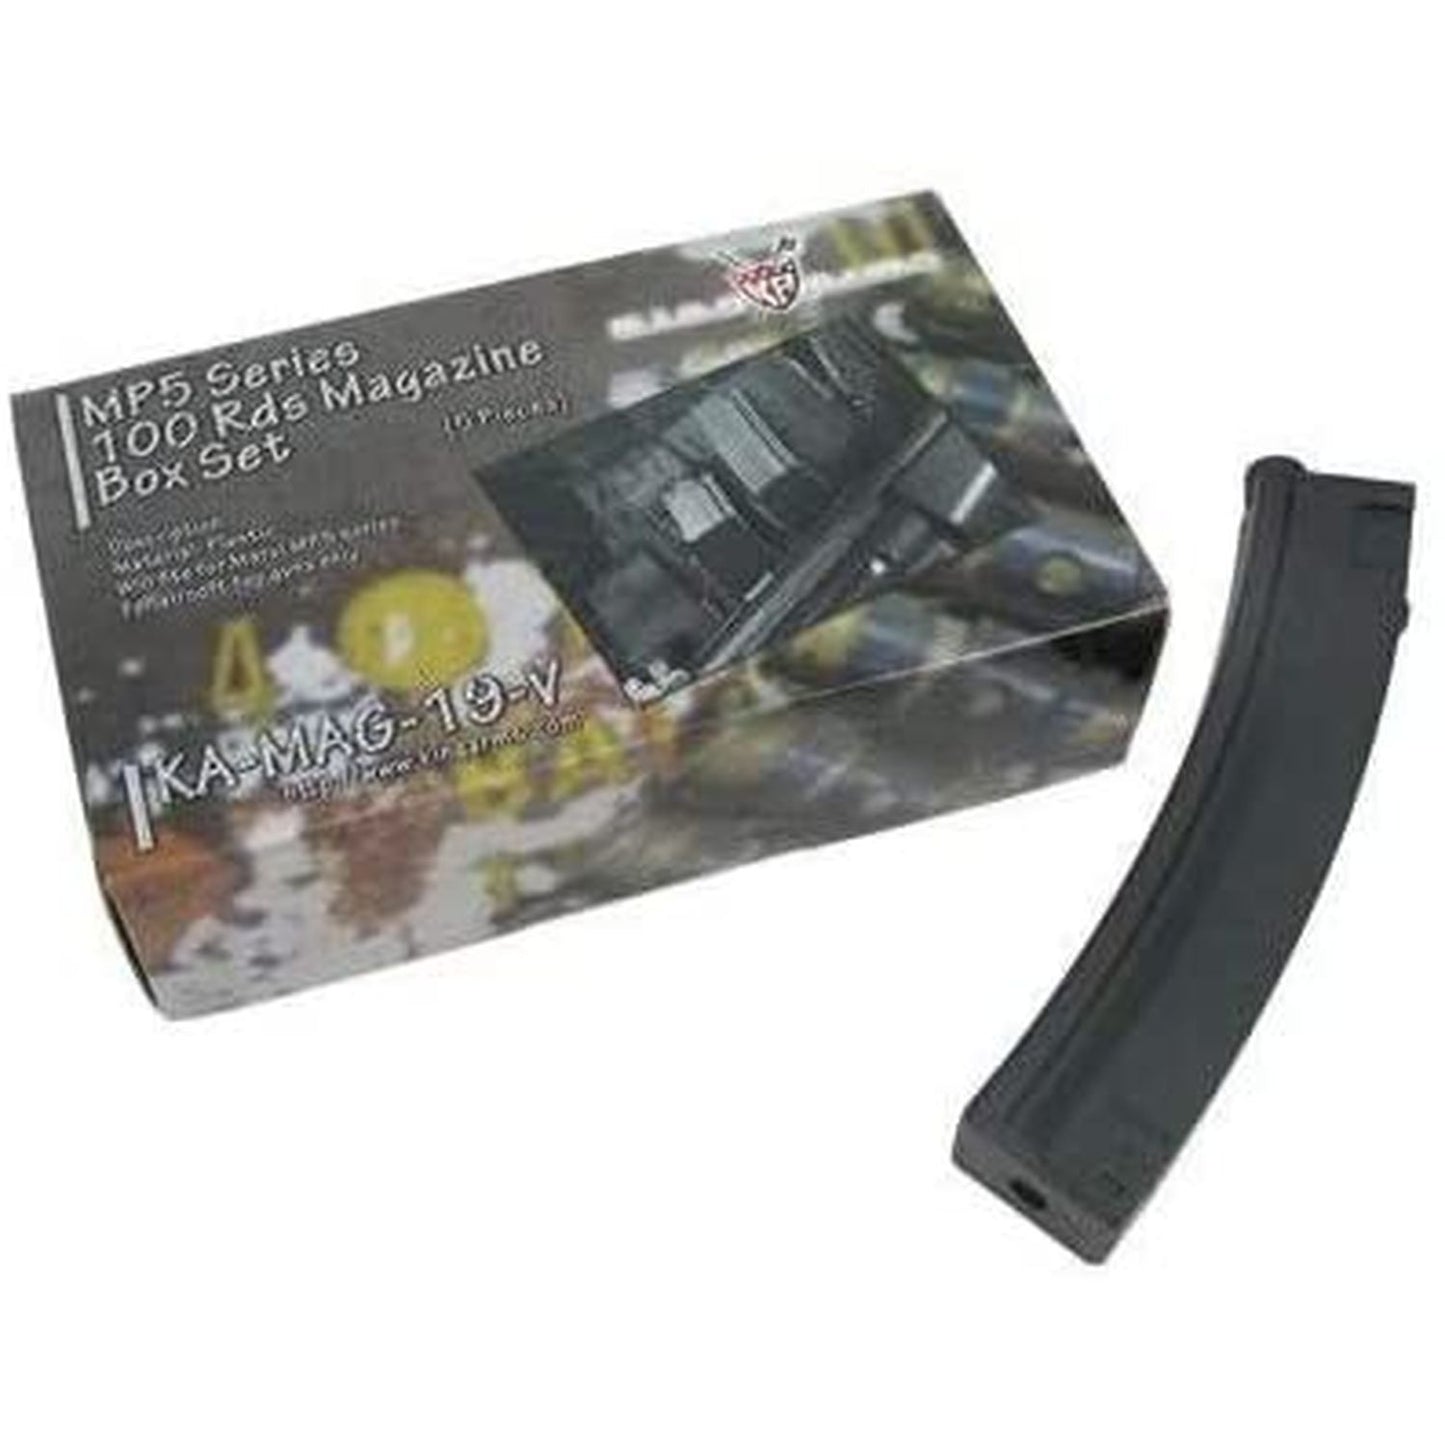 King Arms PDW Airsoft Magazine Loaders